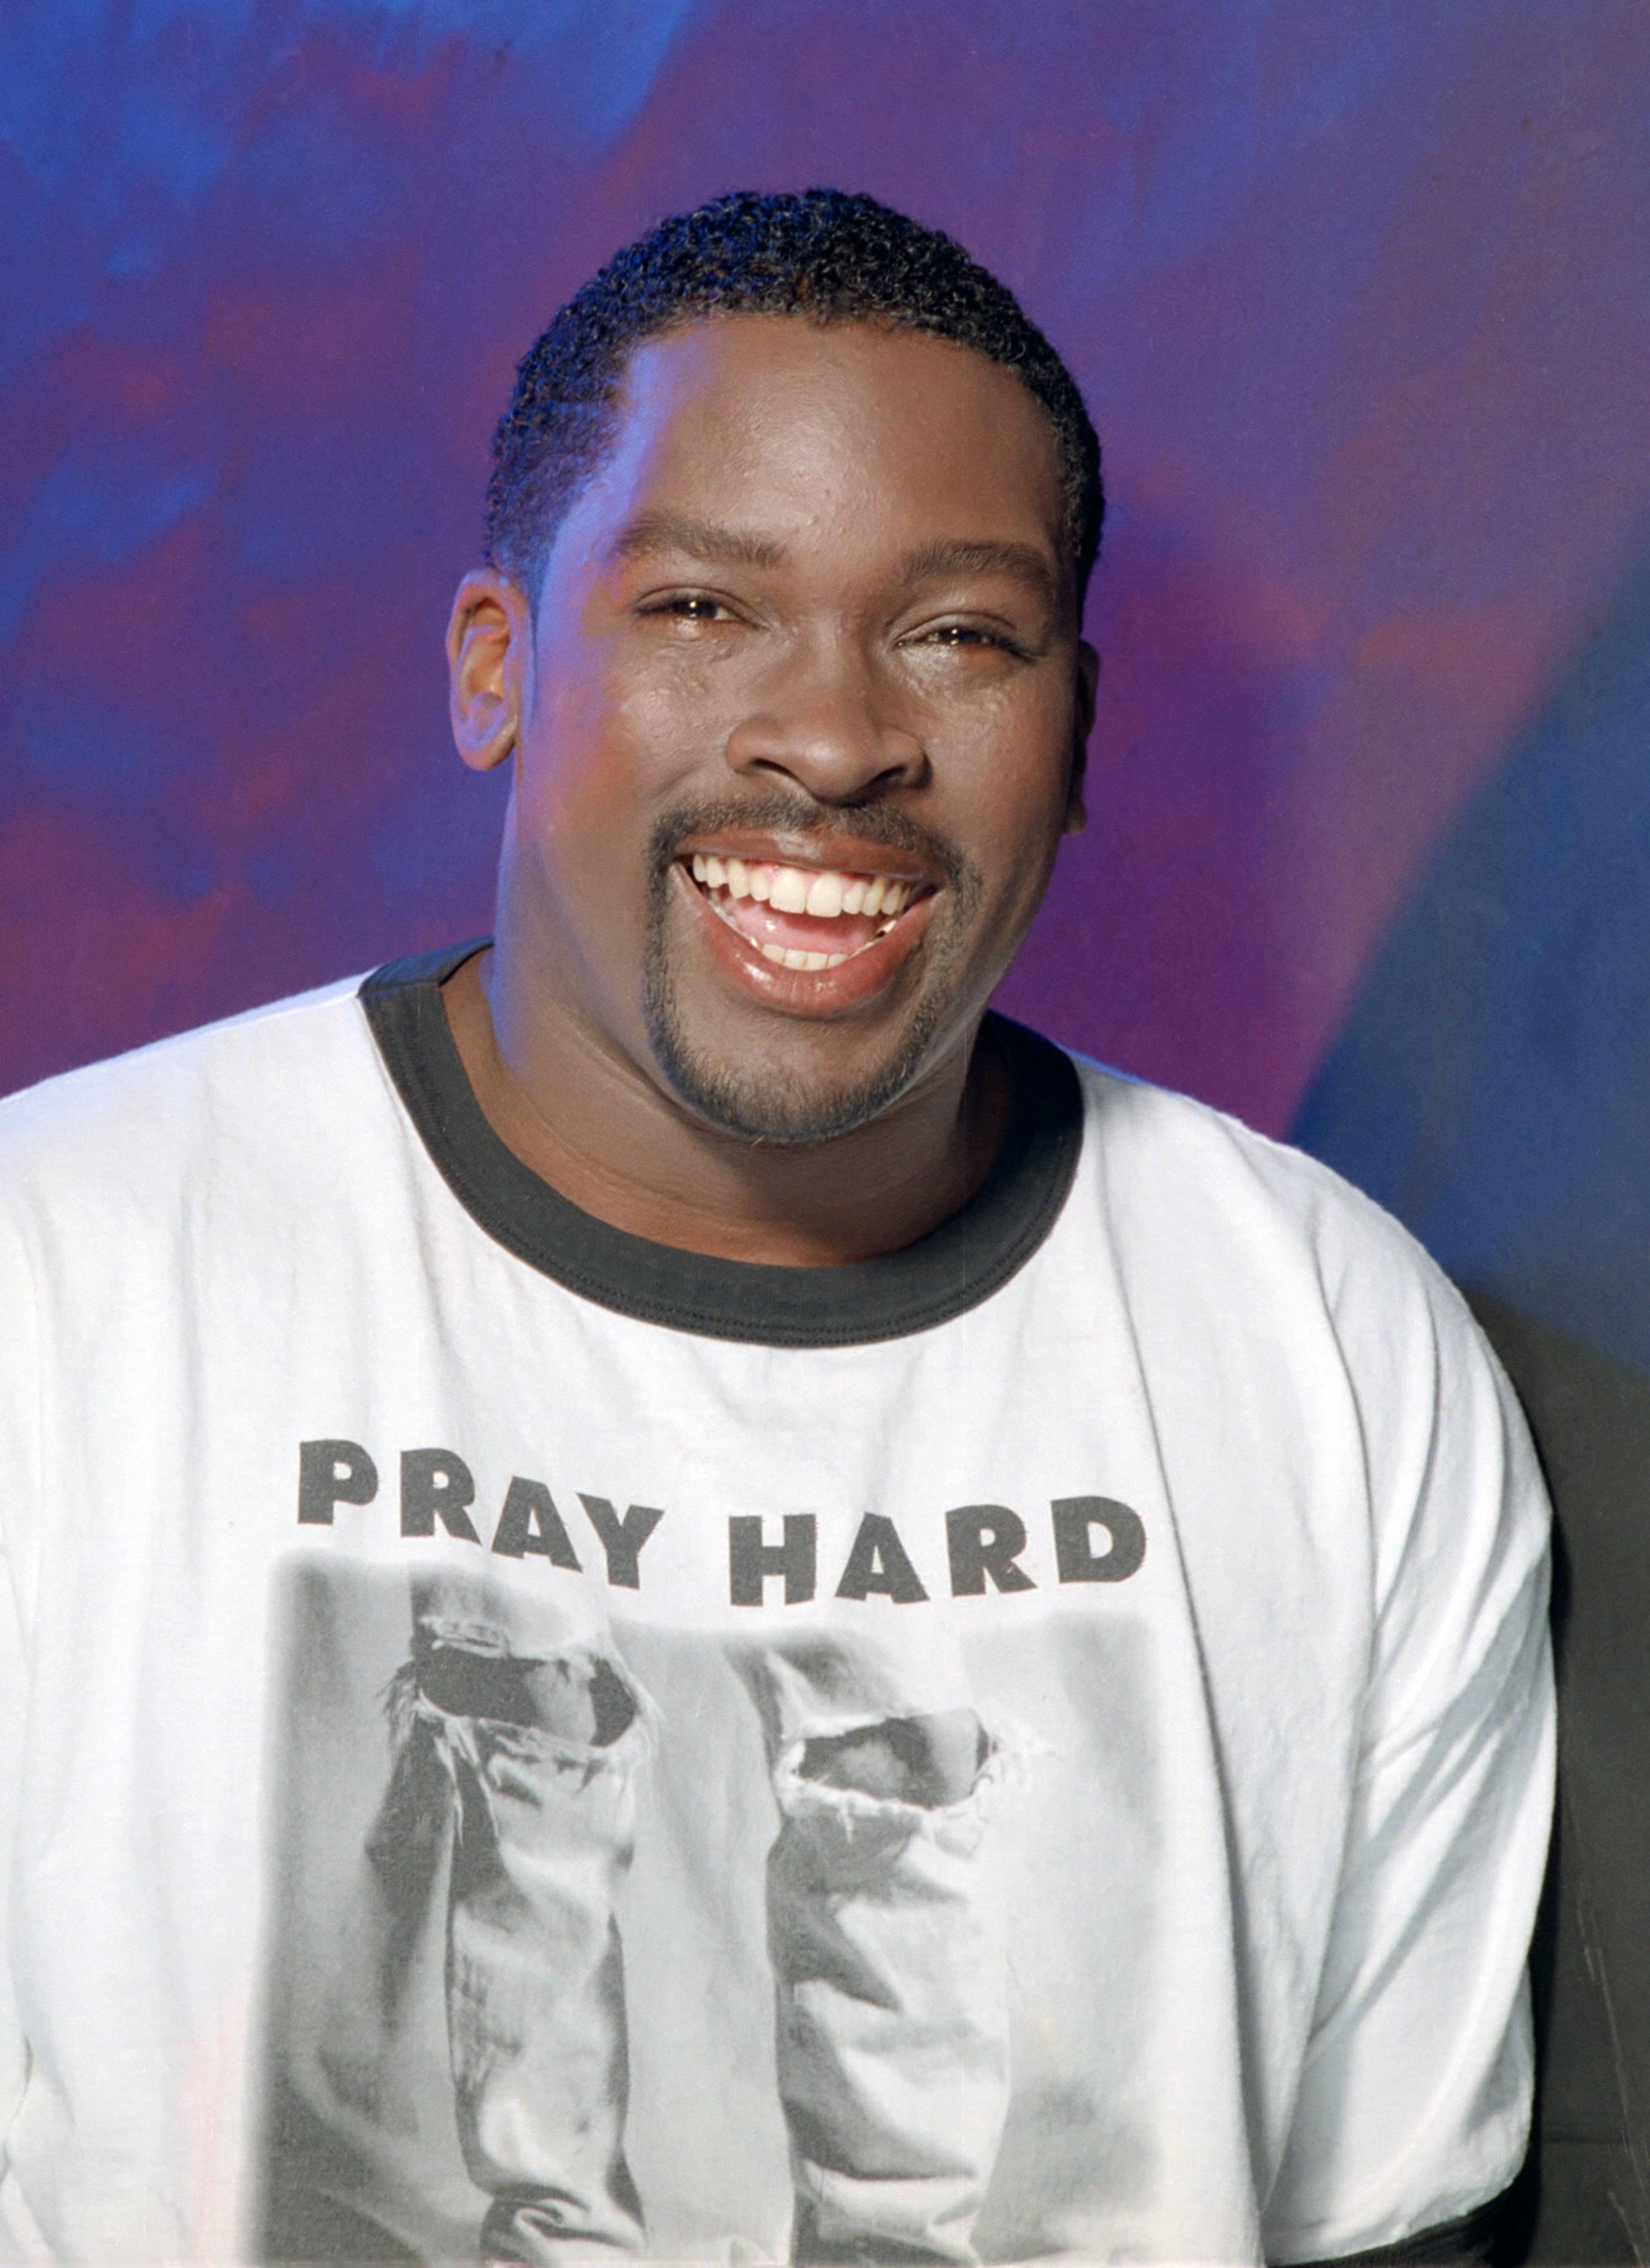 LOS ANGELES - 1997:  Actor and rapper Deezer D (Dearon Thompson) poses for a portrait in 1997 in Los Angeles, California. (Photo by Harry Langdon/Getty Images)